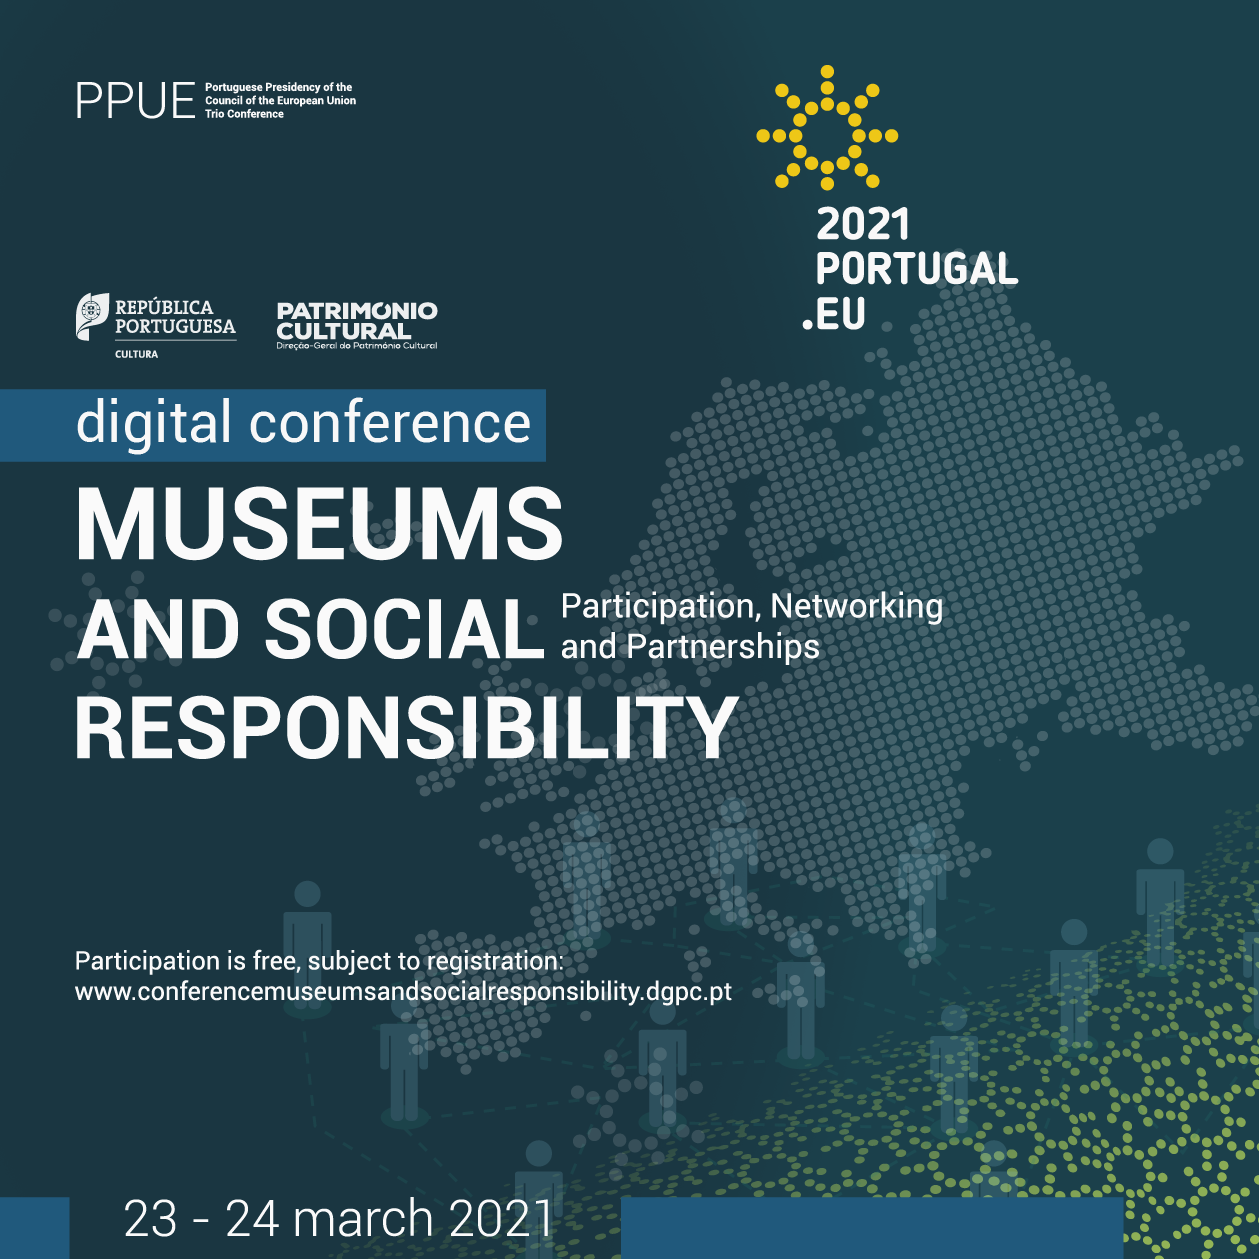  This images announces the digital conference Museums and Social Responsibility. Various logos of supporting and hosting organisations are included. The background is dark blue and shows pictogramms of people as well as a map of Europe.